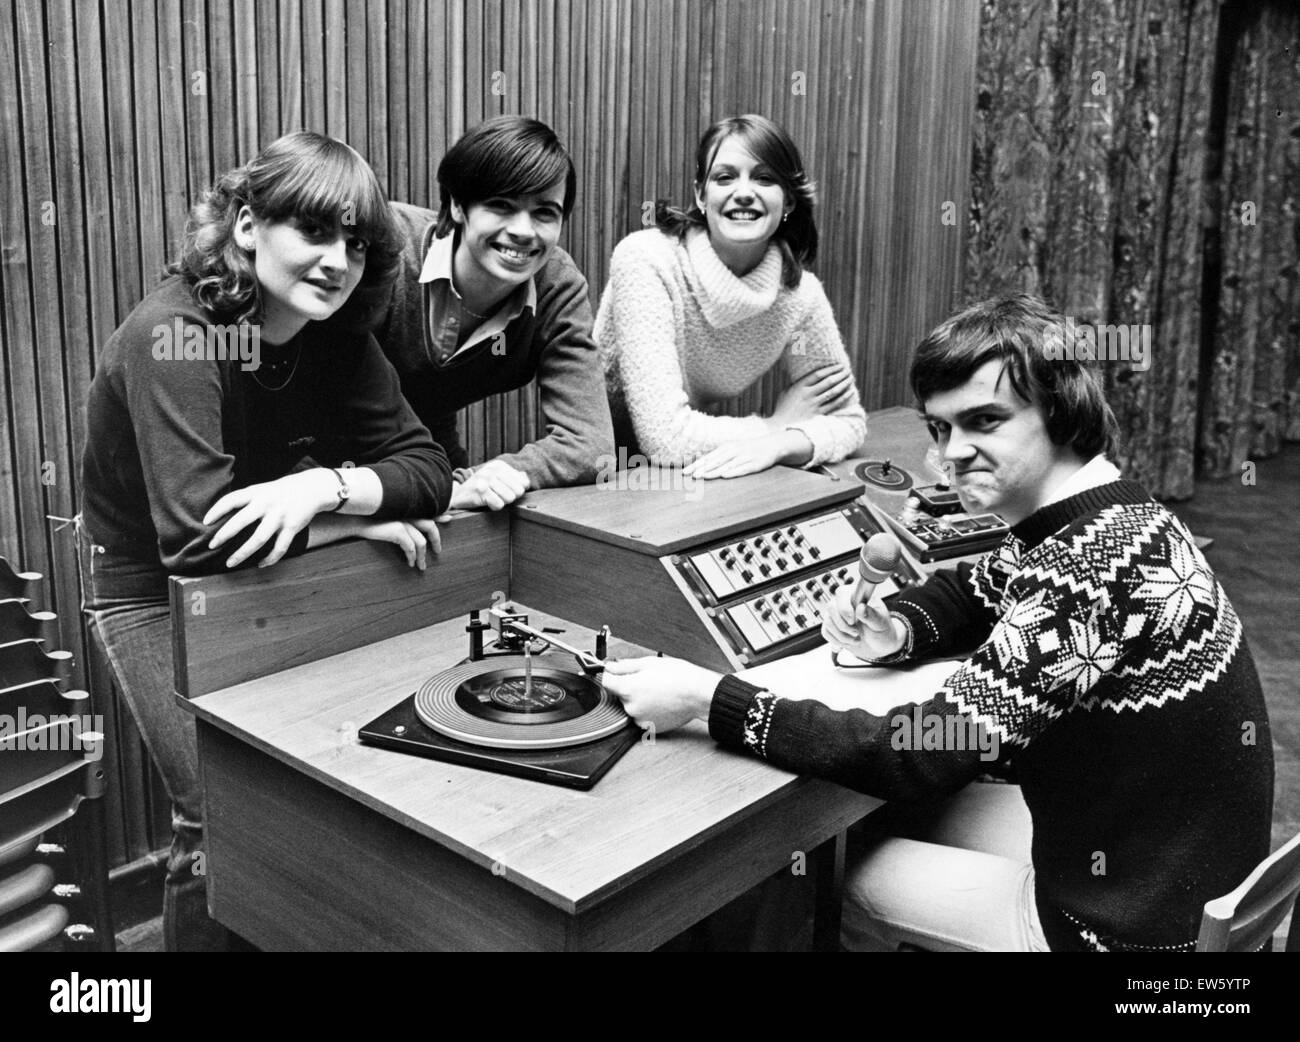 Students from St Mary's Sixth Form College, Middlesbrough, 3rd December 1980. They have launched their own radio station, with the accent on news, views and music. Station master, Paul Flanagan (seated) shows fellow pupils (left to right) Joanne McCurley, Stock Photo